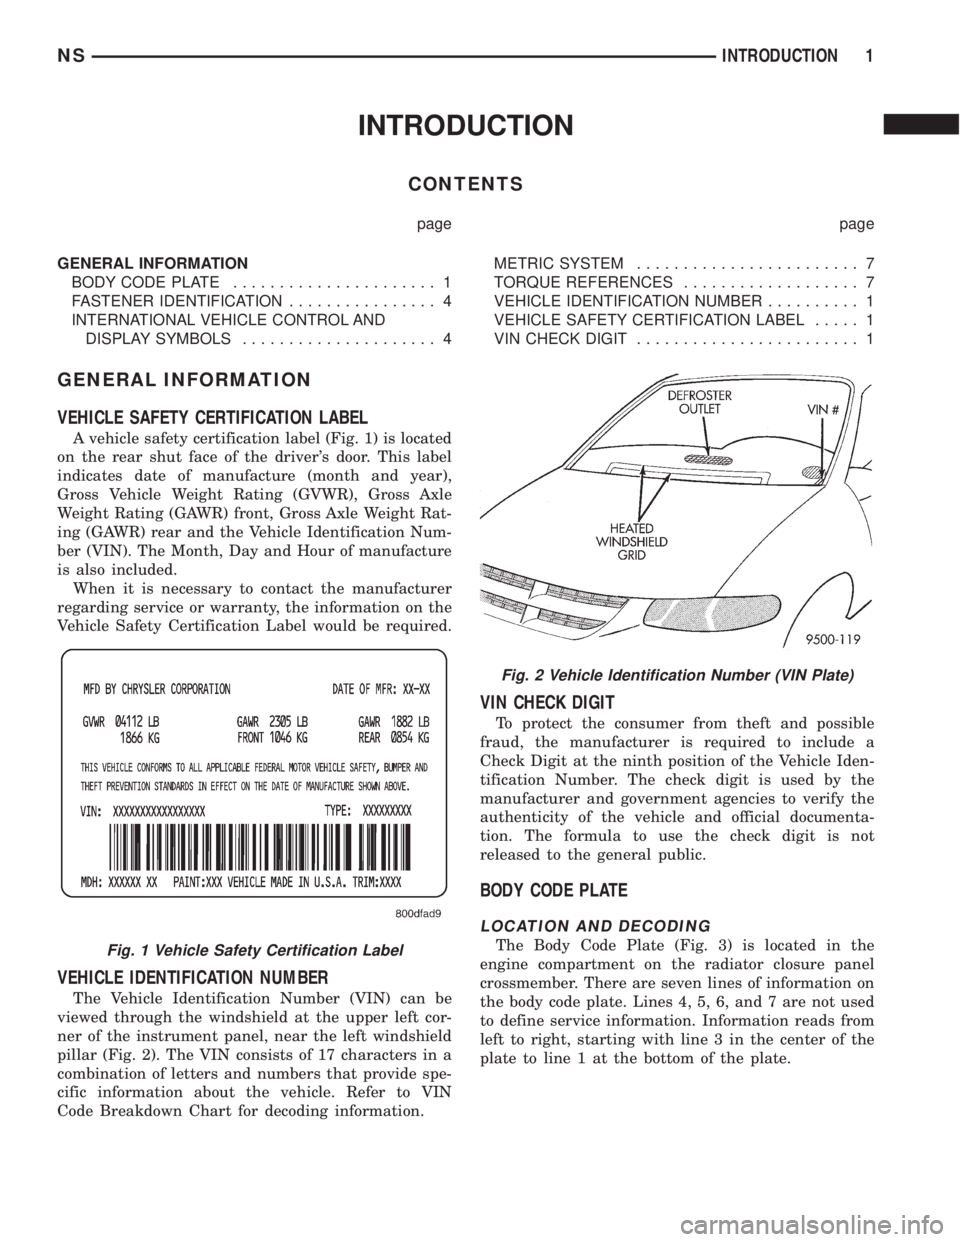 CHRYSLER VOYAGER 1996  Service Manual INTRODUCTION
CONTENTS
page page
GENERAL INFORMATION
BODY CODE PLATE...................... 1
FASTENER IDENTIFICATION................ 4
INTERNATIONAL VEHICLE CONTROL AND
DISPLAY SYMBOLS.................